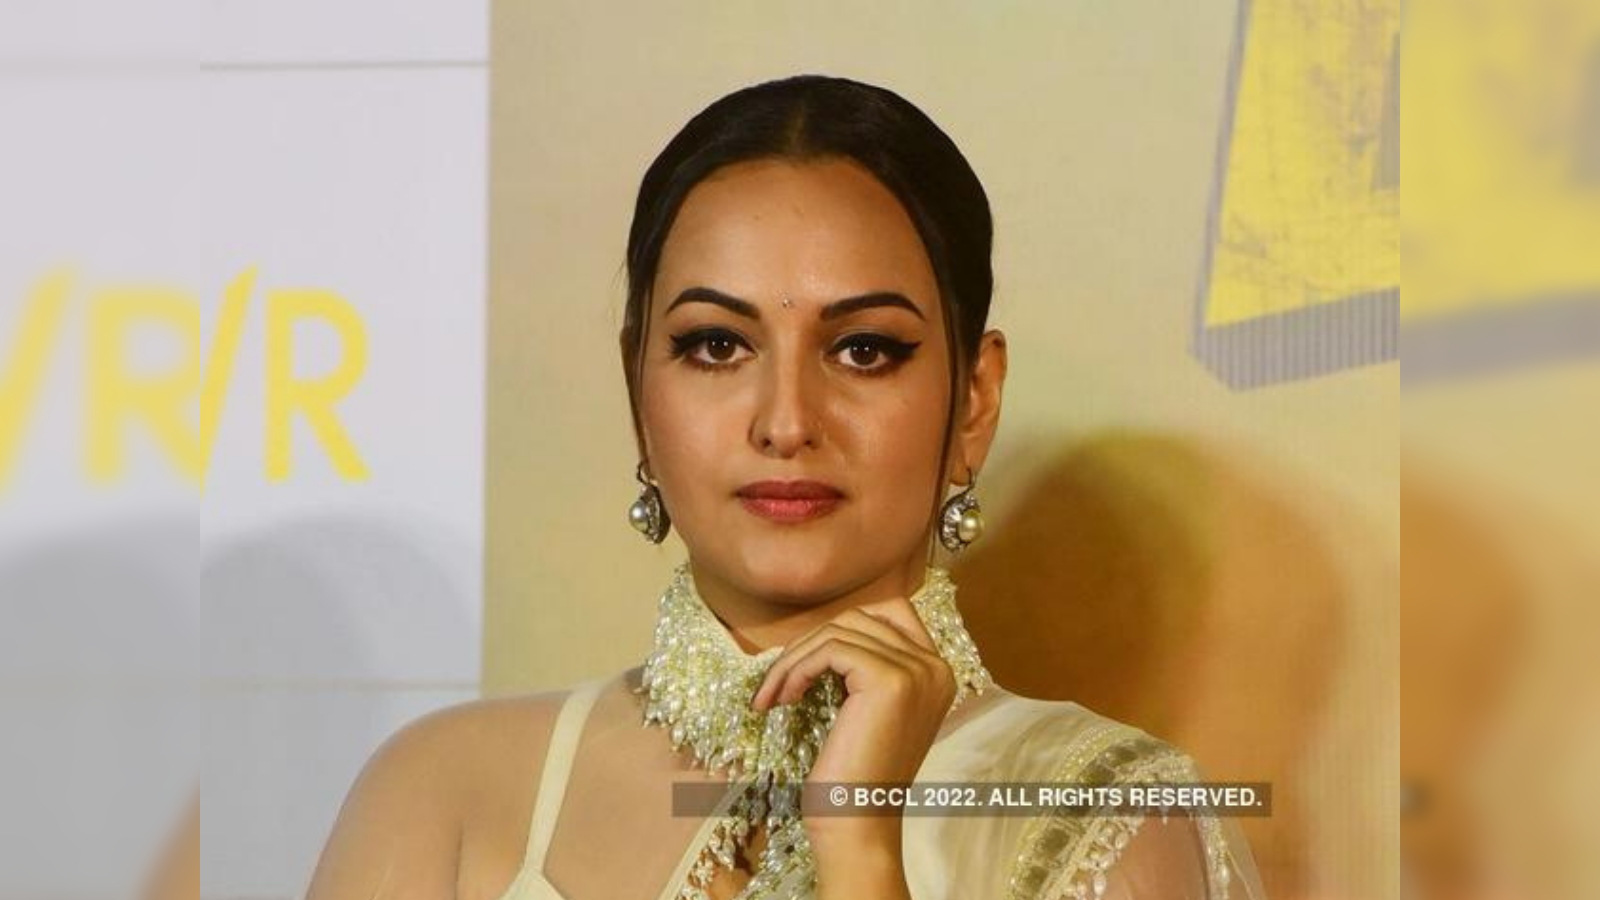 sonakshi sinha: Legal woes for Sonakshi Sinha? Reports claim non-bailable  warrant issued against actress for alleged fraud of Rs 37 L - The Economic  Times